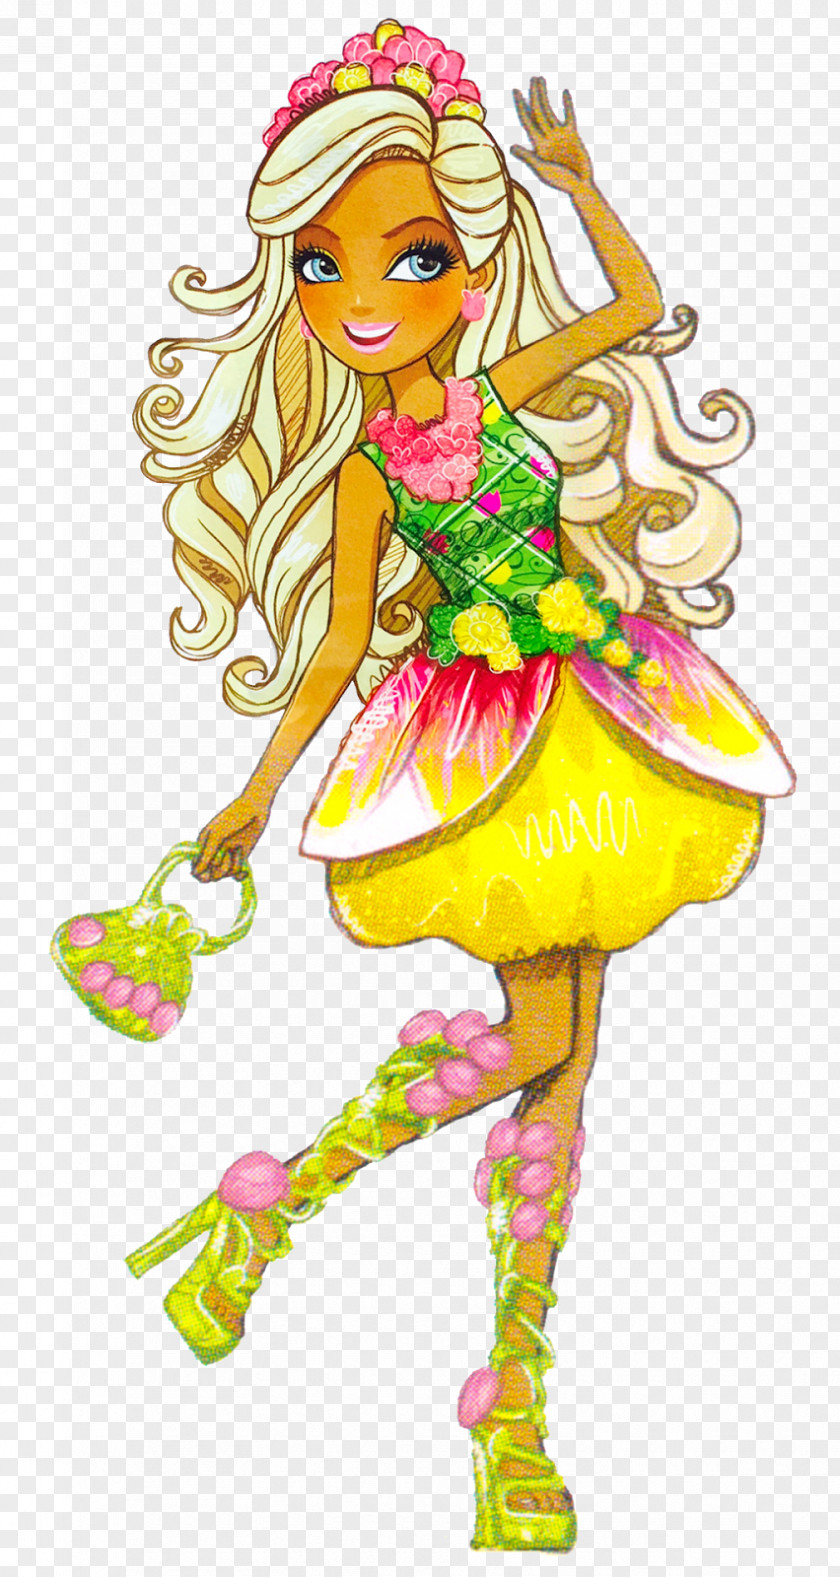 Youtube YouTube Ever After High Thumbelina Wikia PNG